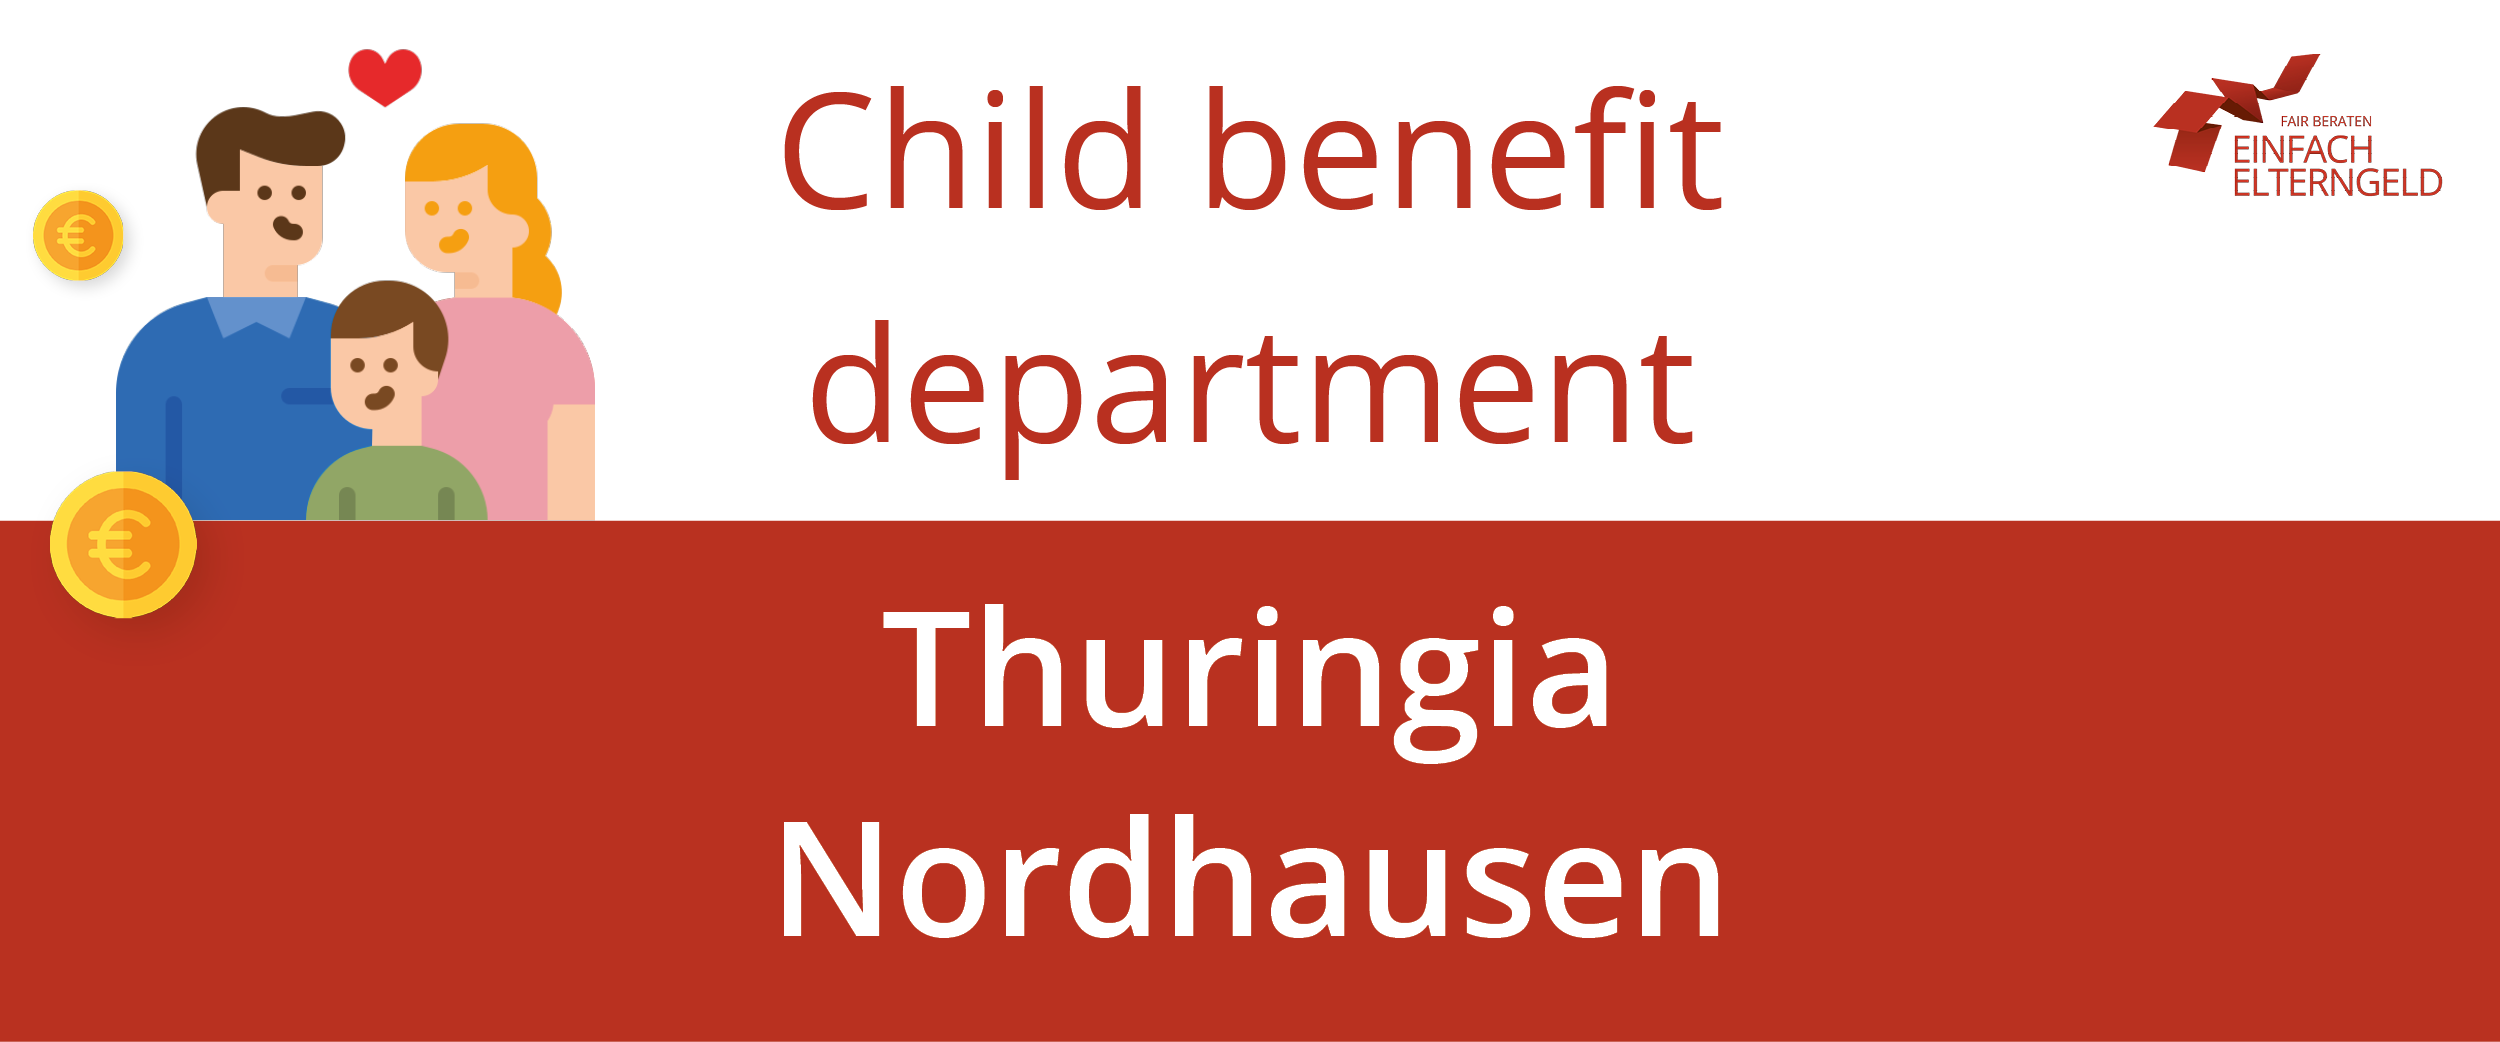 We present you the Child benefit department Thuringia Nordhausen.